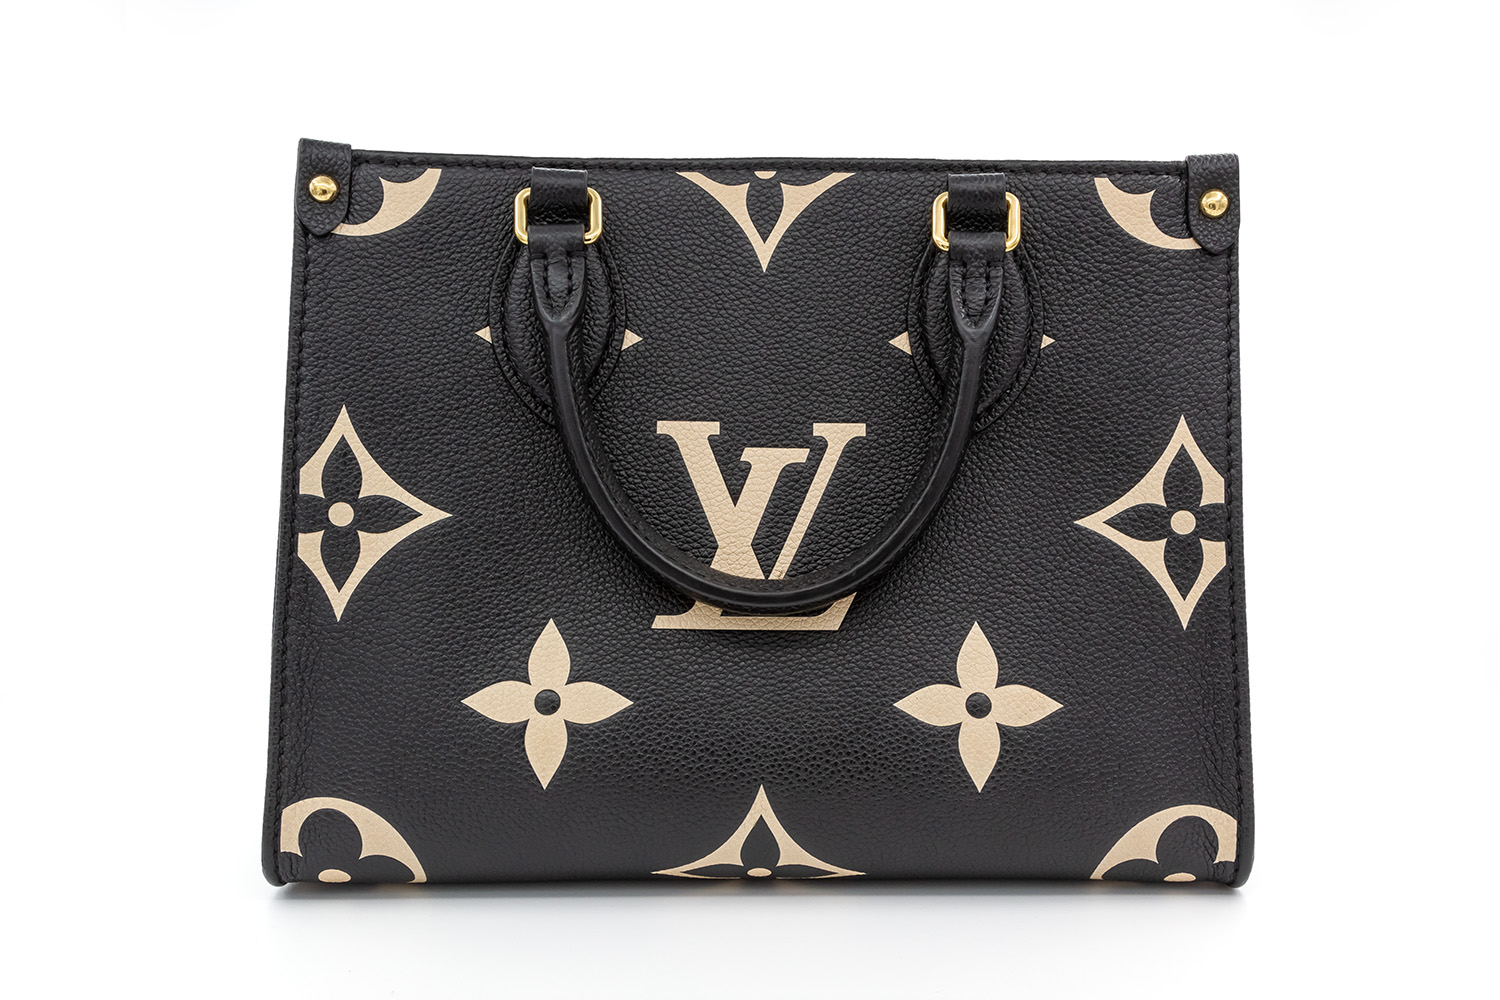 louis-vuitton on the go pm